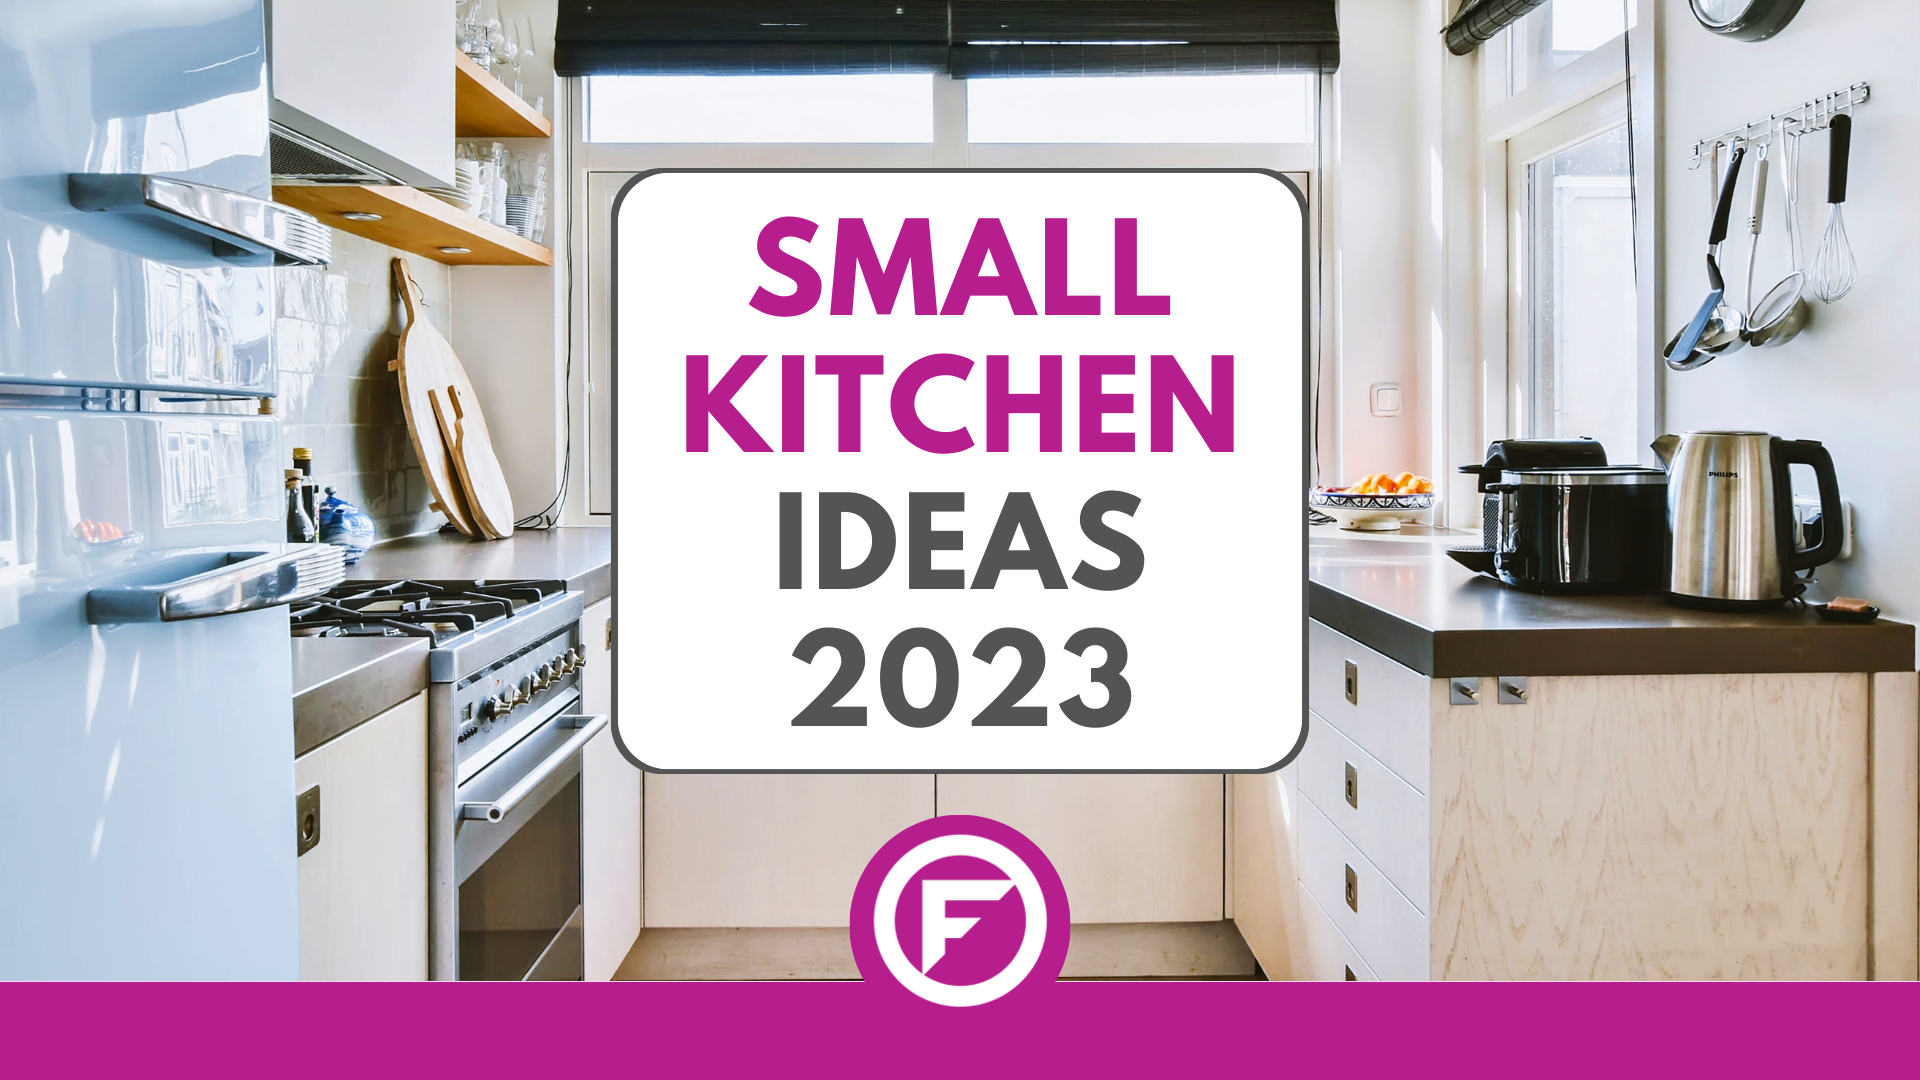 Store More in Your Small Kitchen with These Space-Saving Ideas in 2023